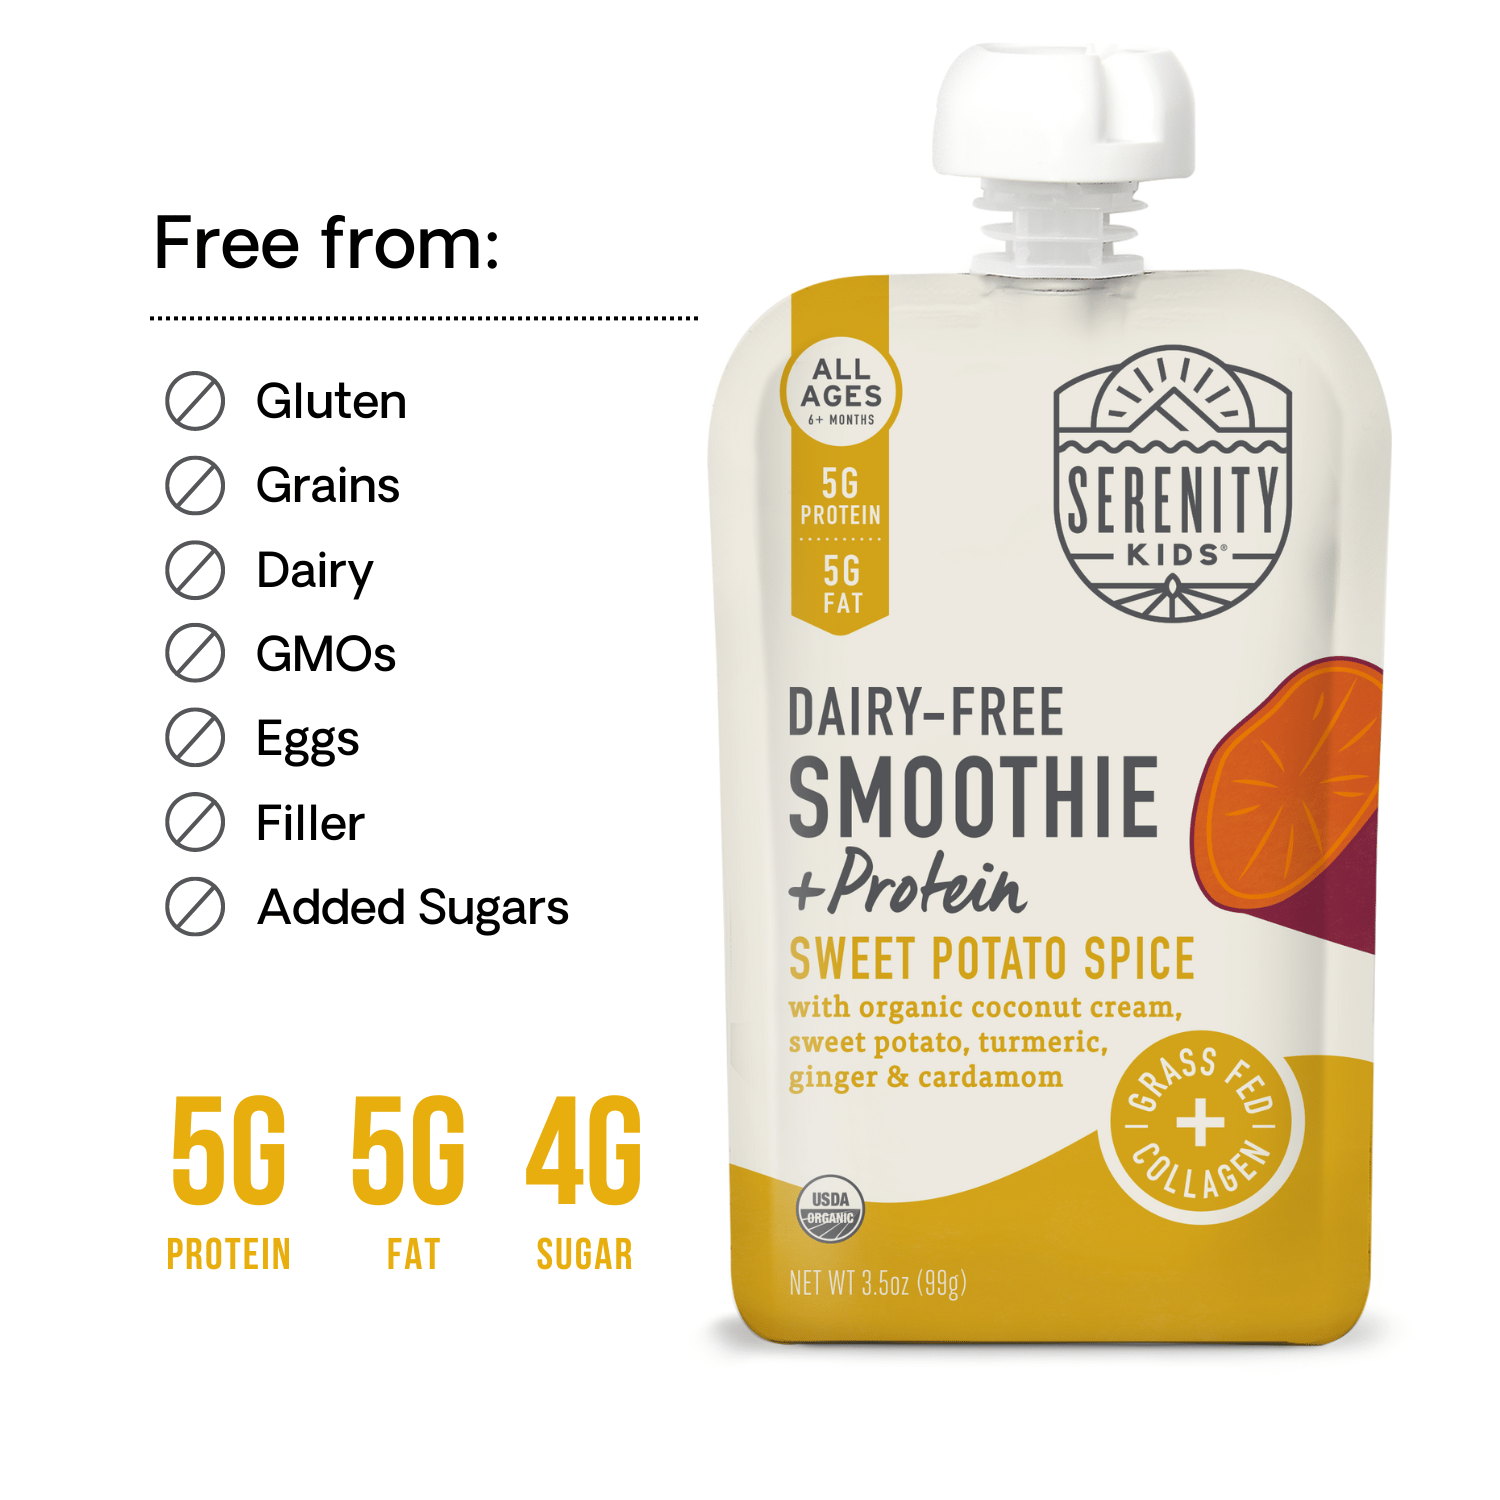 Sweet Potato Spice Dairy-Free Smoothie + Protein - Serenity Kids - Free From Ingredients